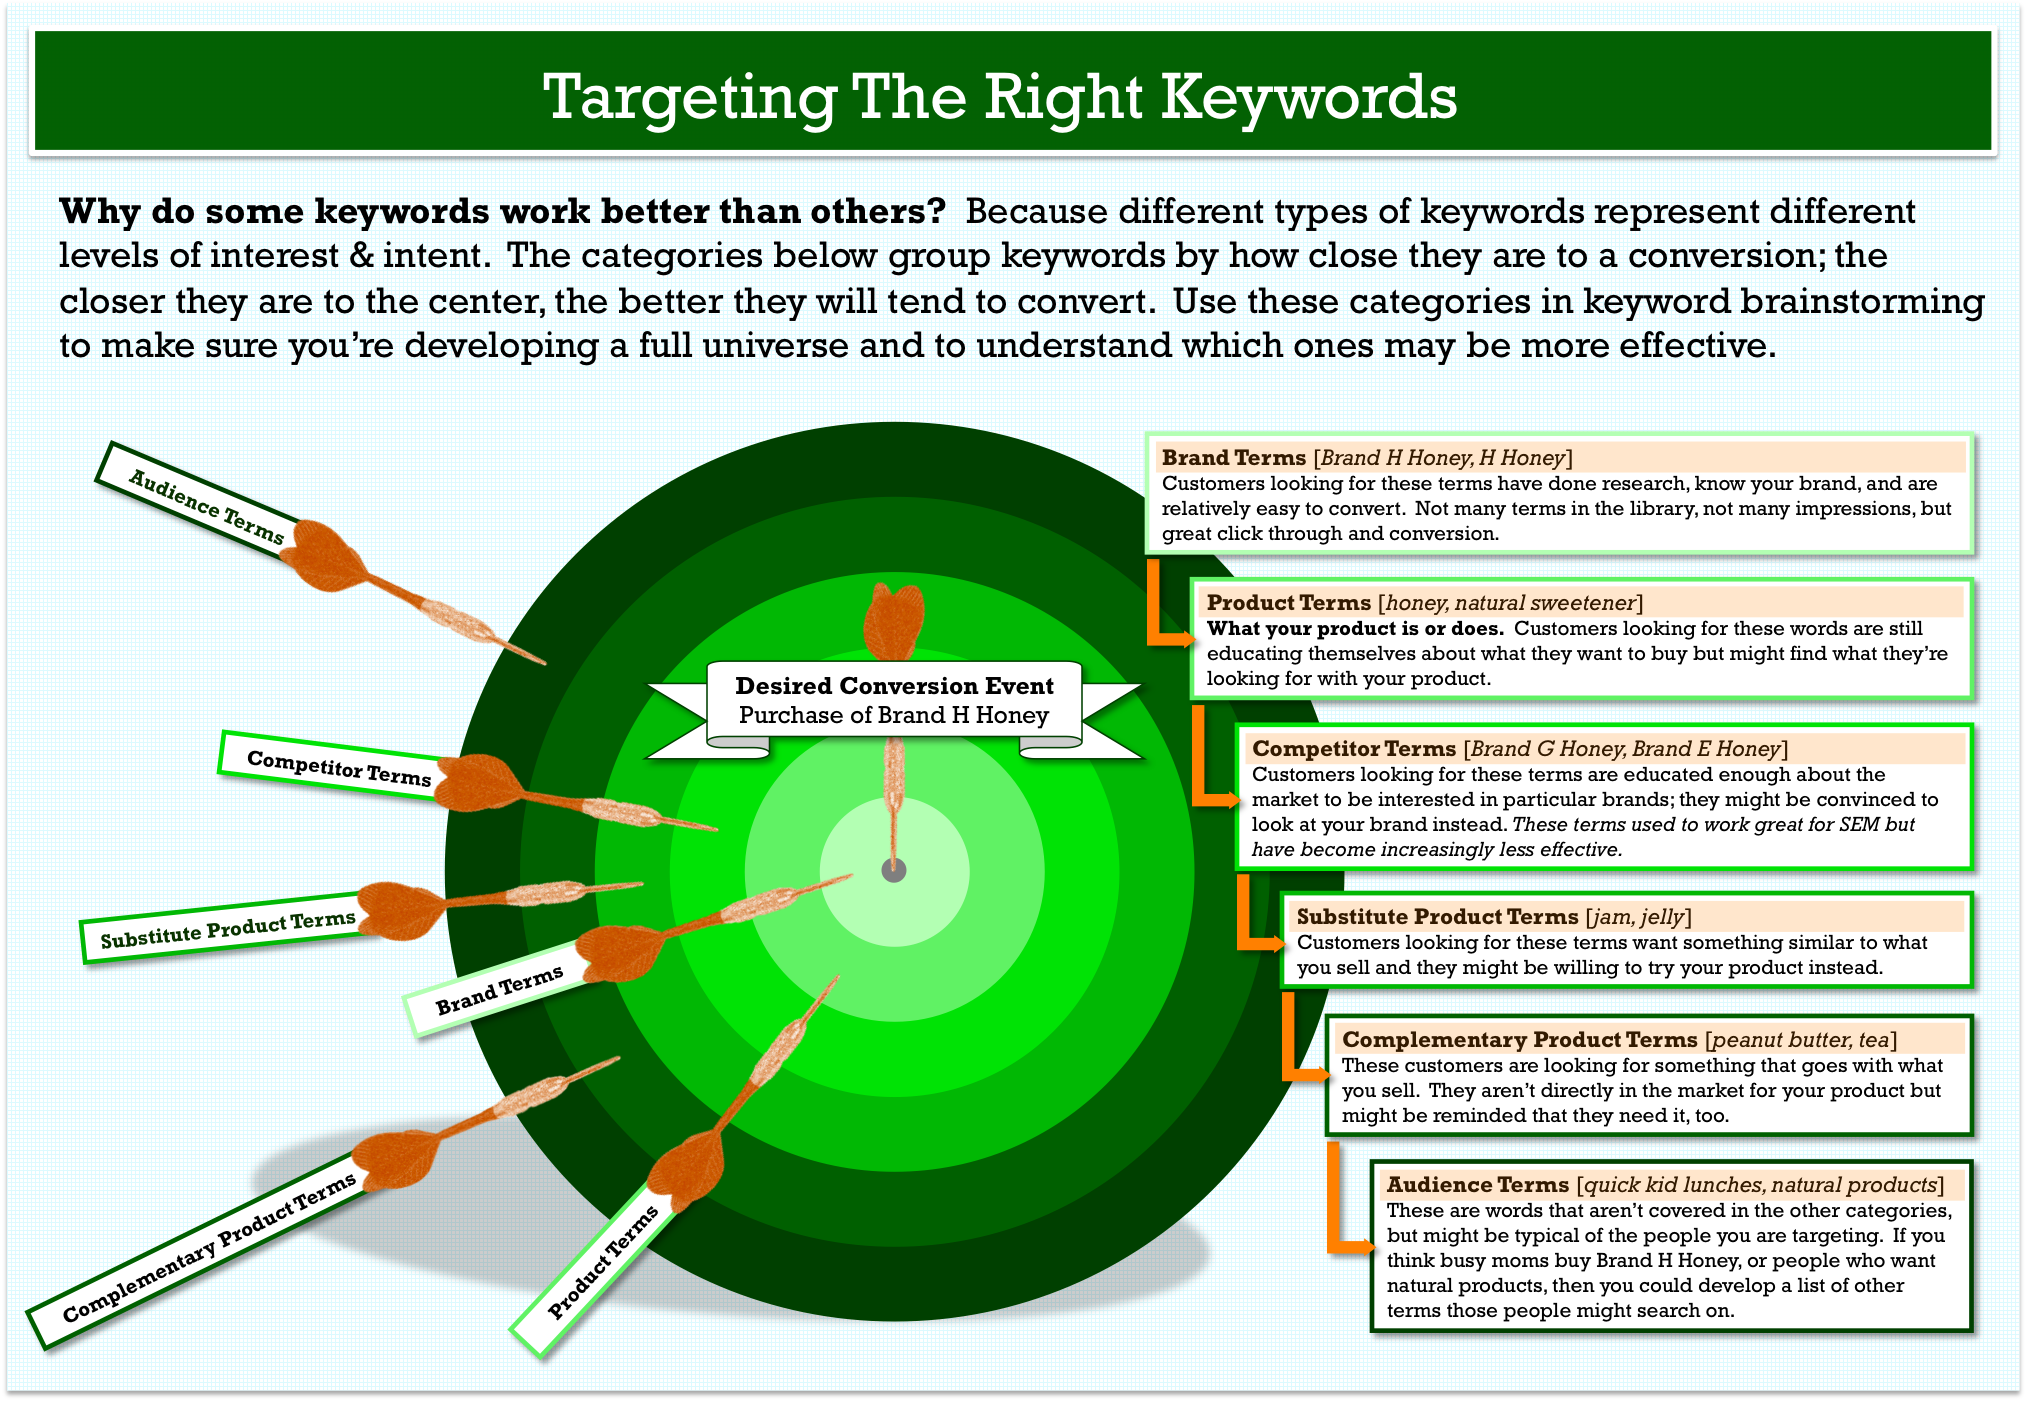 Using the right keywords for internet marketing